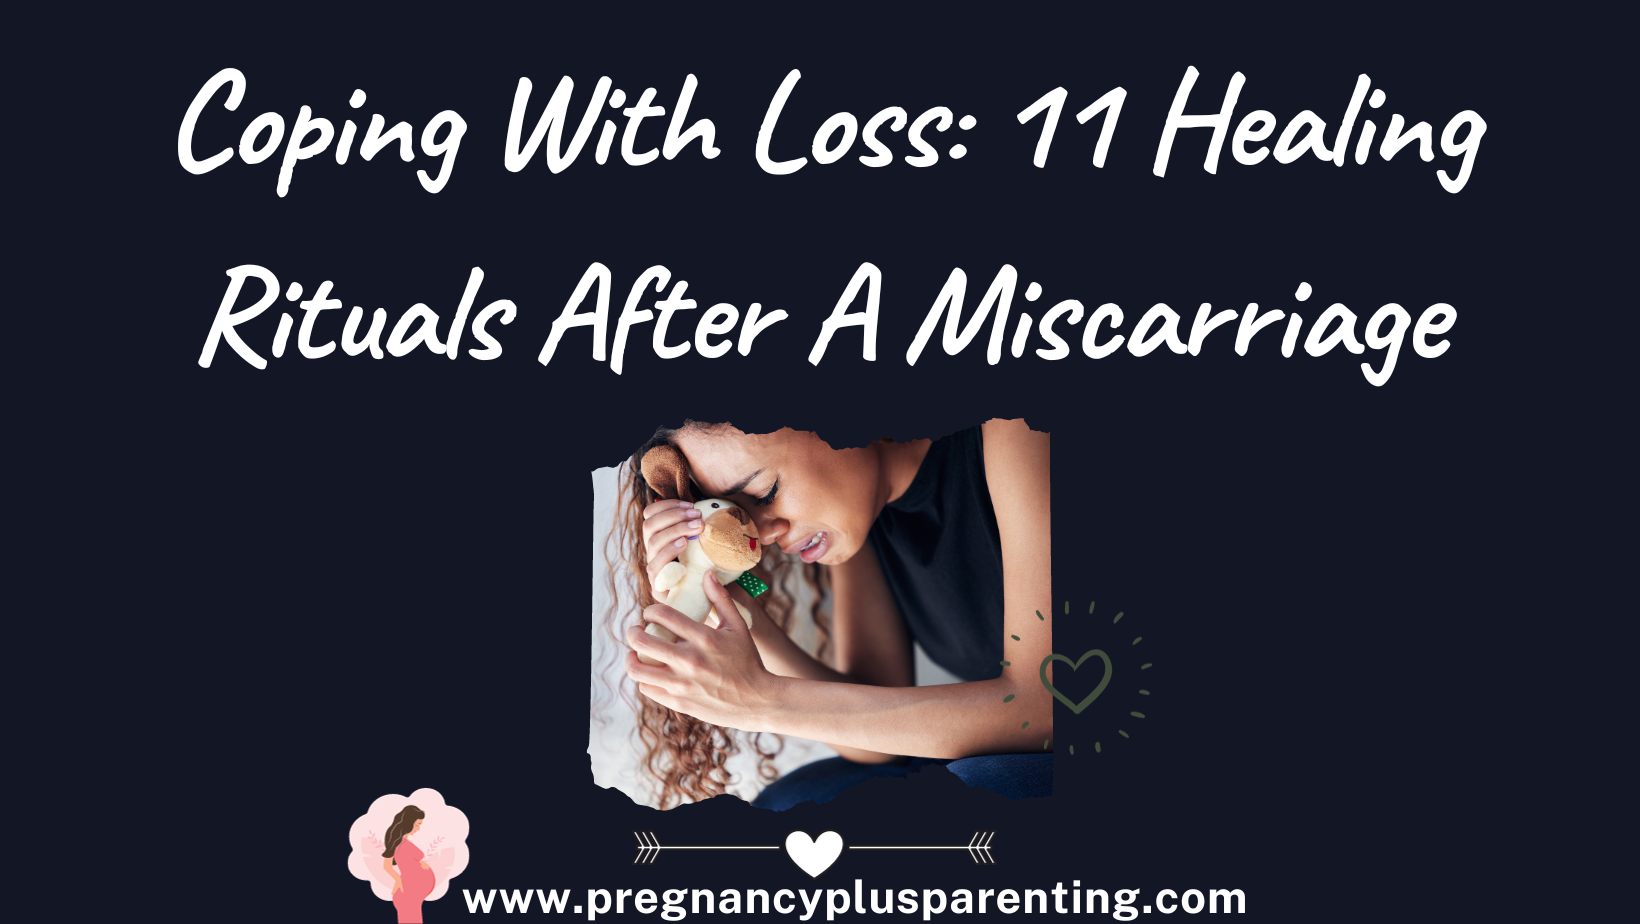 Coping With Loss: 11 Healing Rituals After A Miscarriage